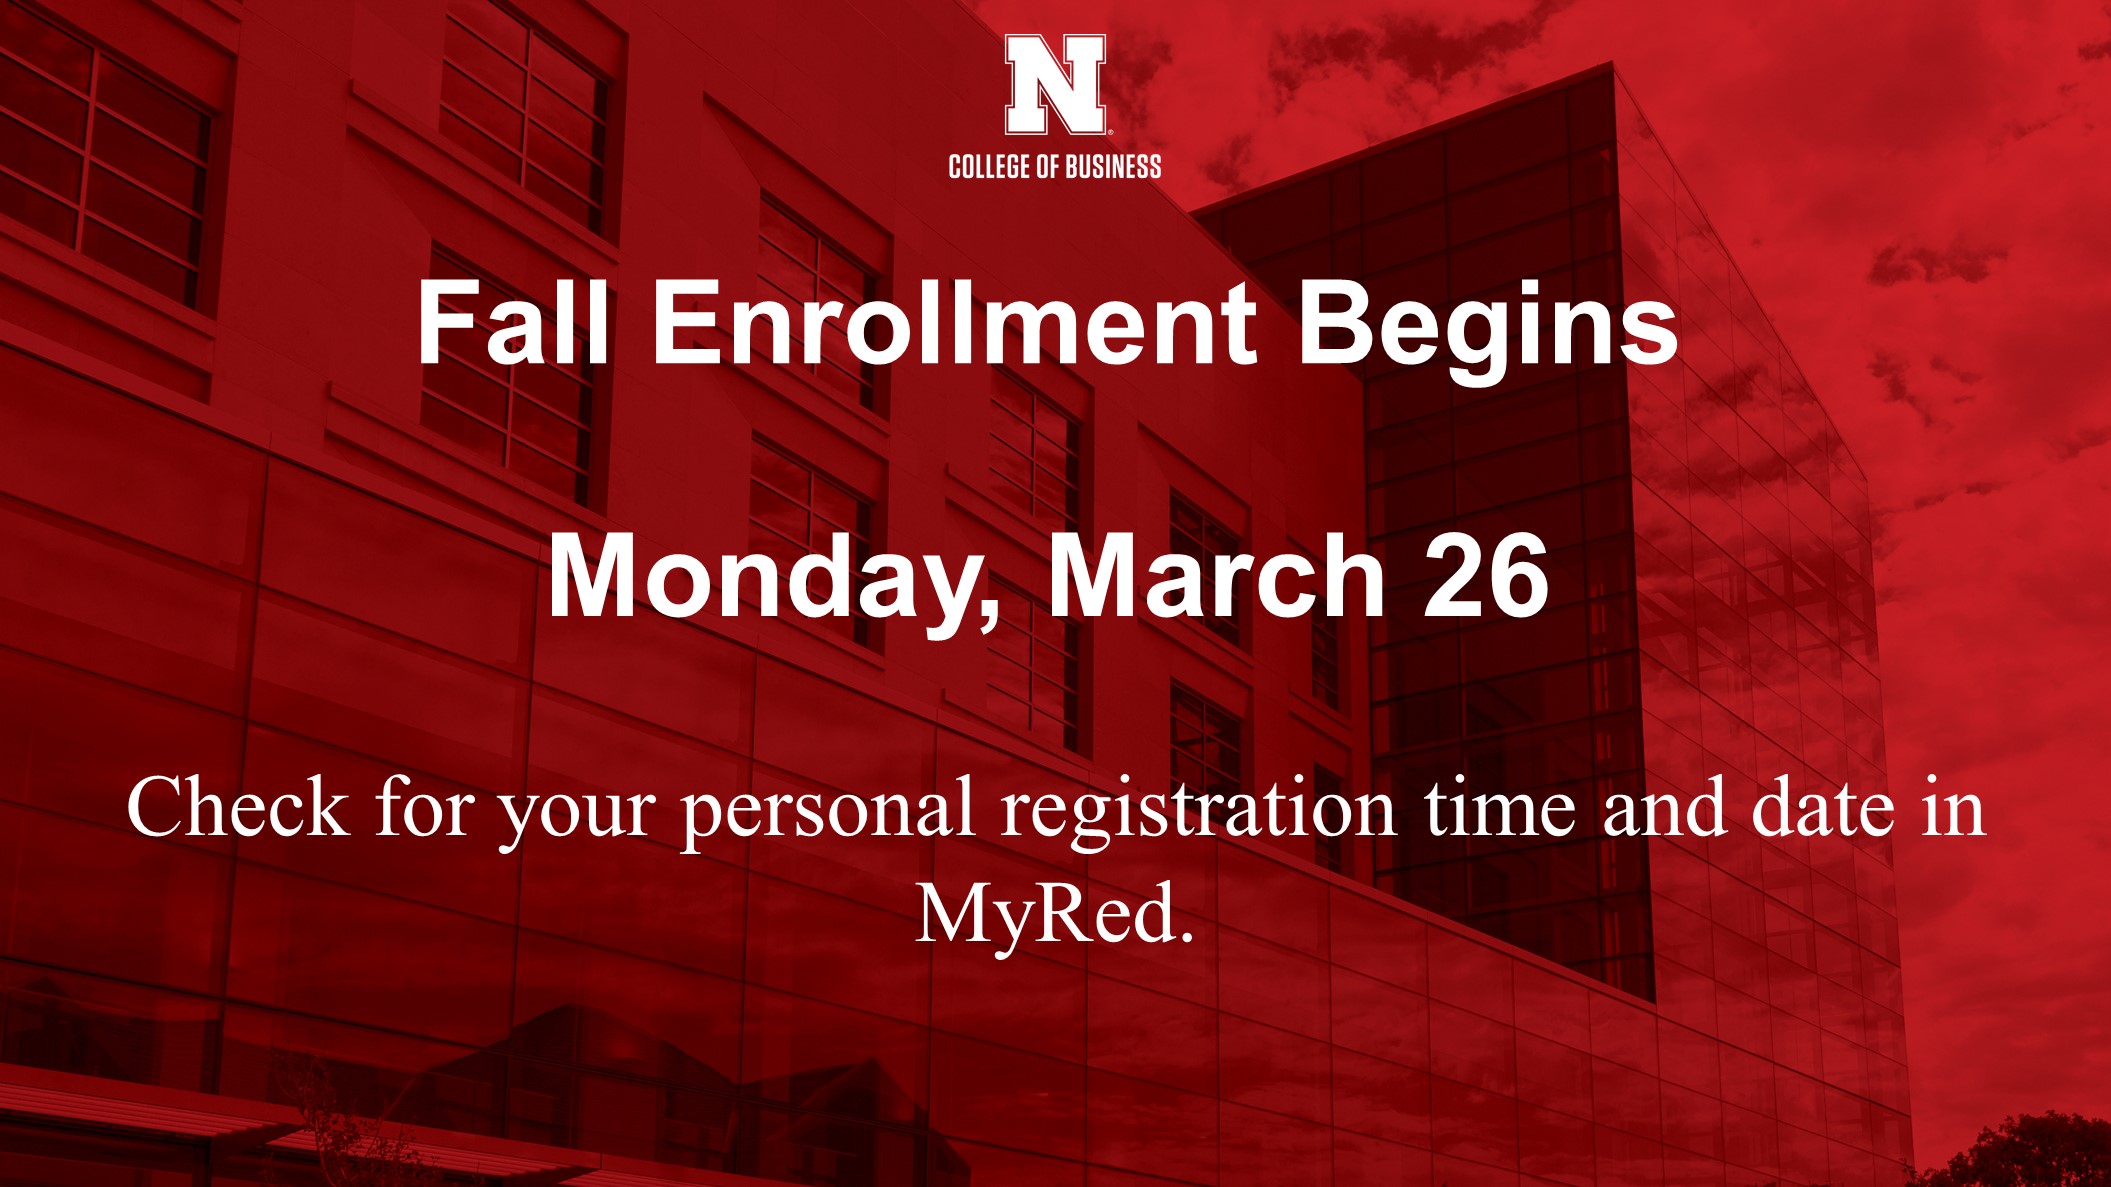 Fall Enrollment Begins Monday, March 26 Announce University of